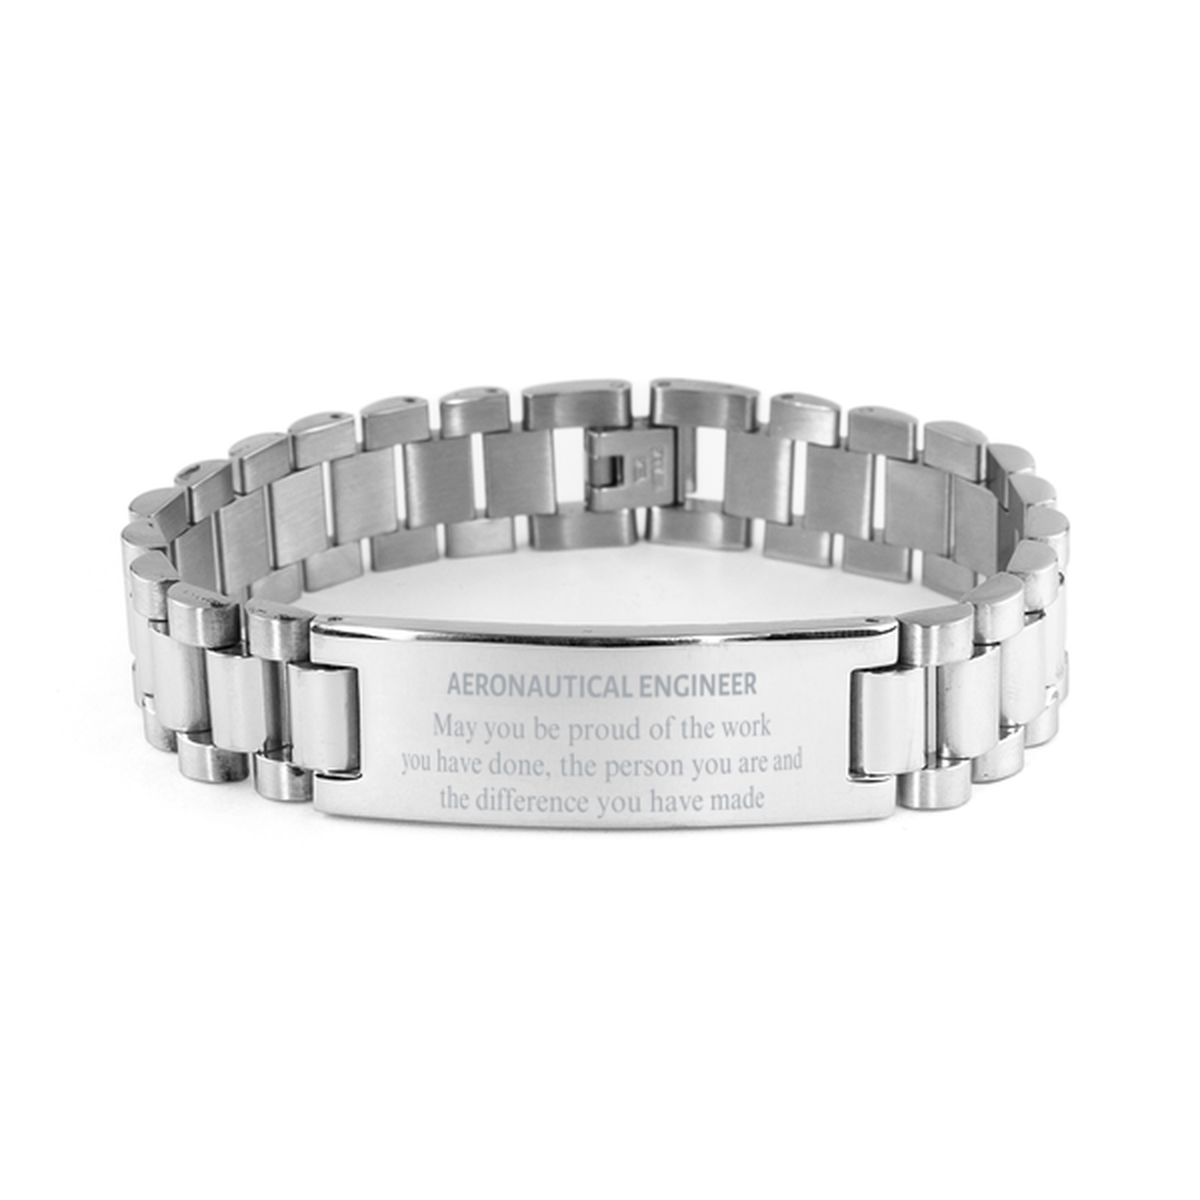 Aeronautical Engineer May you be proud of the work you have done, Retirement Aeronautical Engineer Ladder Stainless Steel Bracelet for Colleague Appreciation Gifts Amazing for Aeronautical Engineer